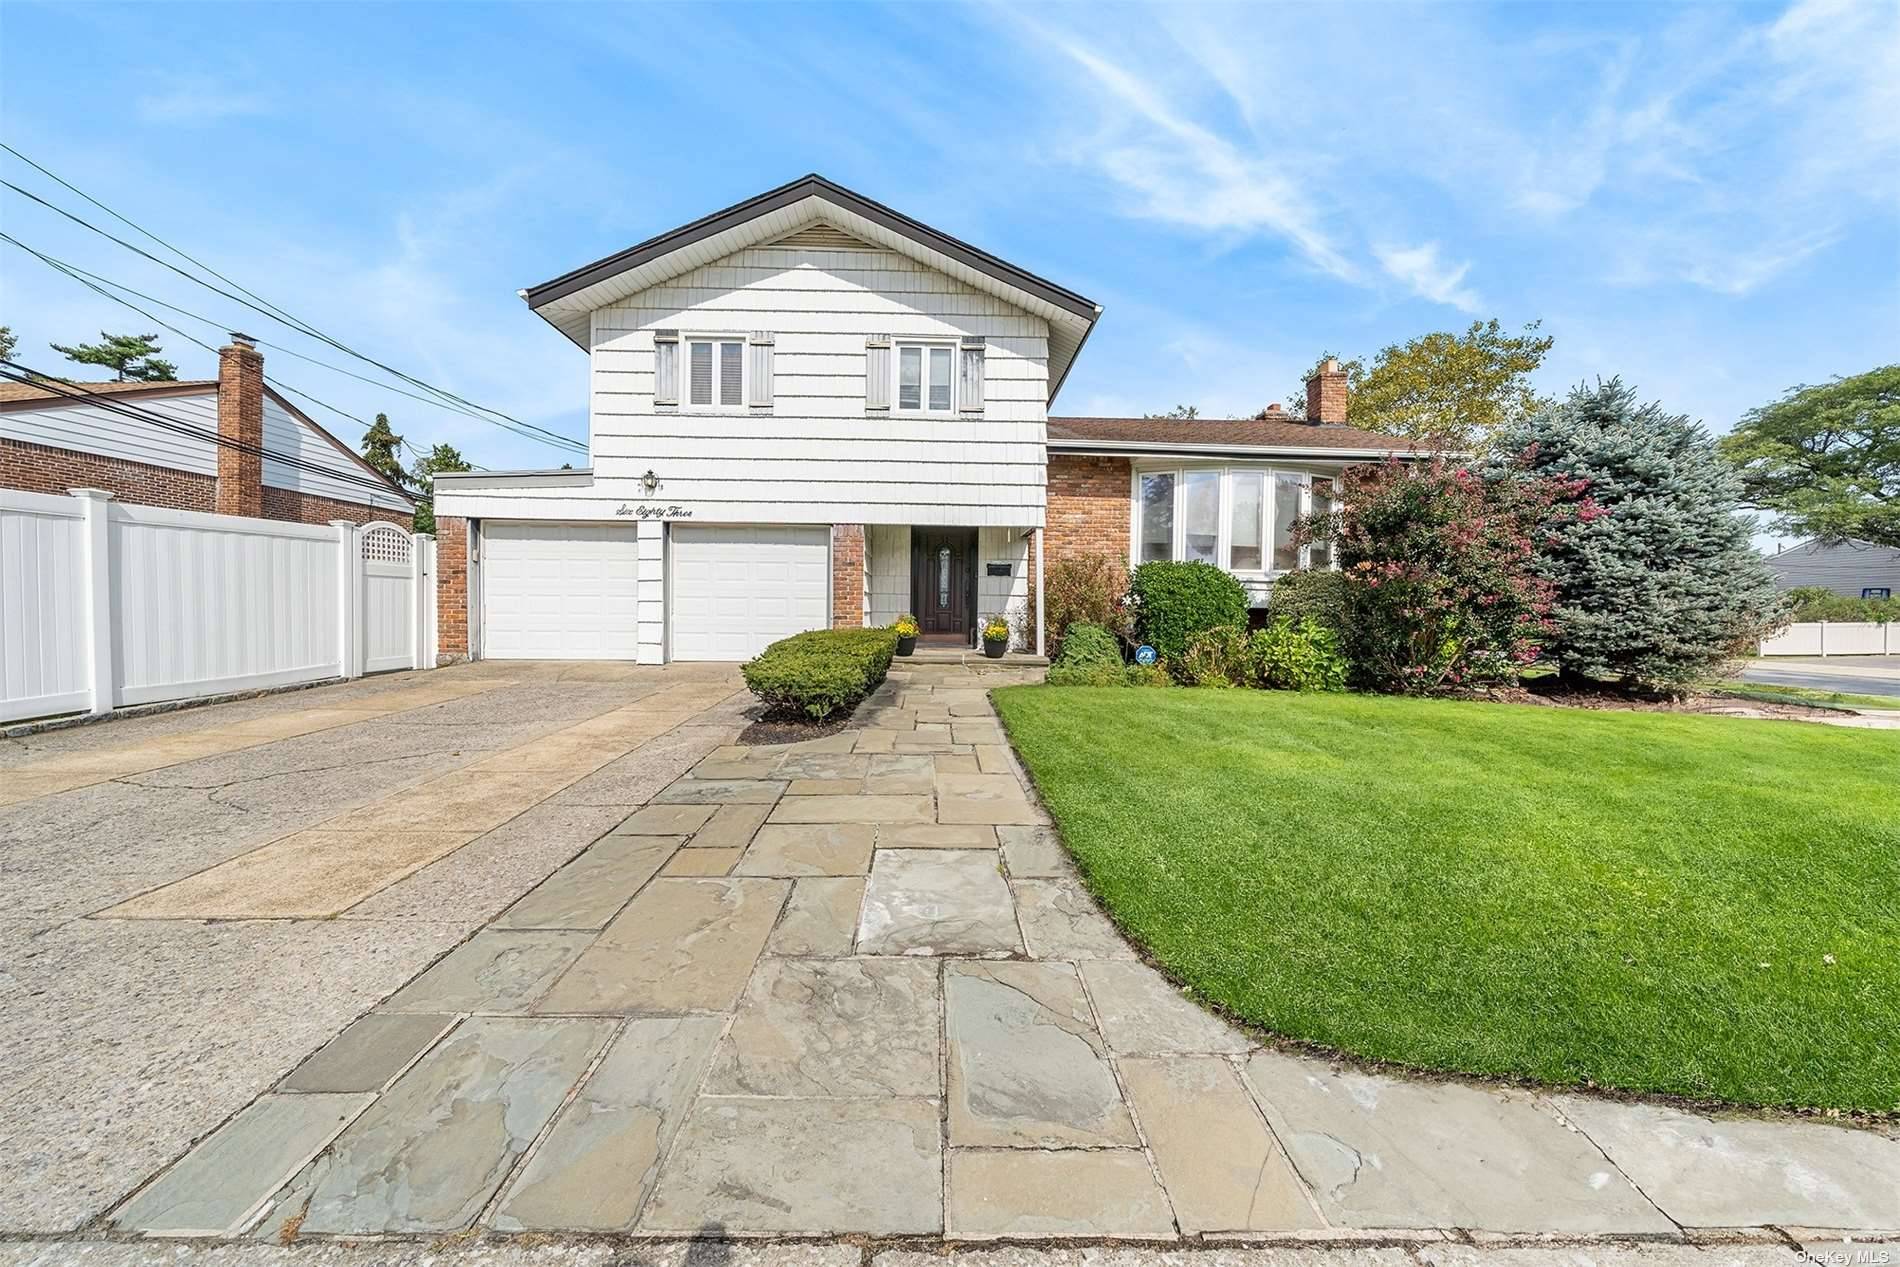 We Welcome You To This Beautifully Updated Four Level Split In The Center Of The Highly Sought After Community of North Woodmere.